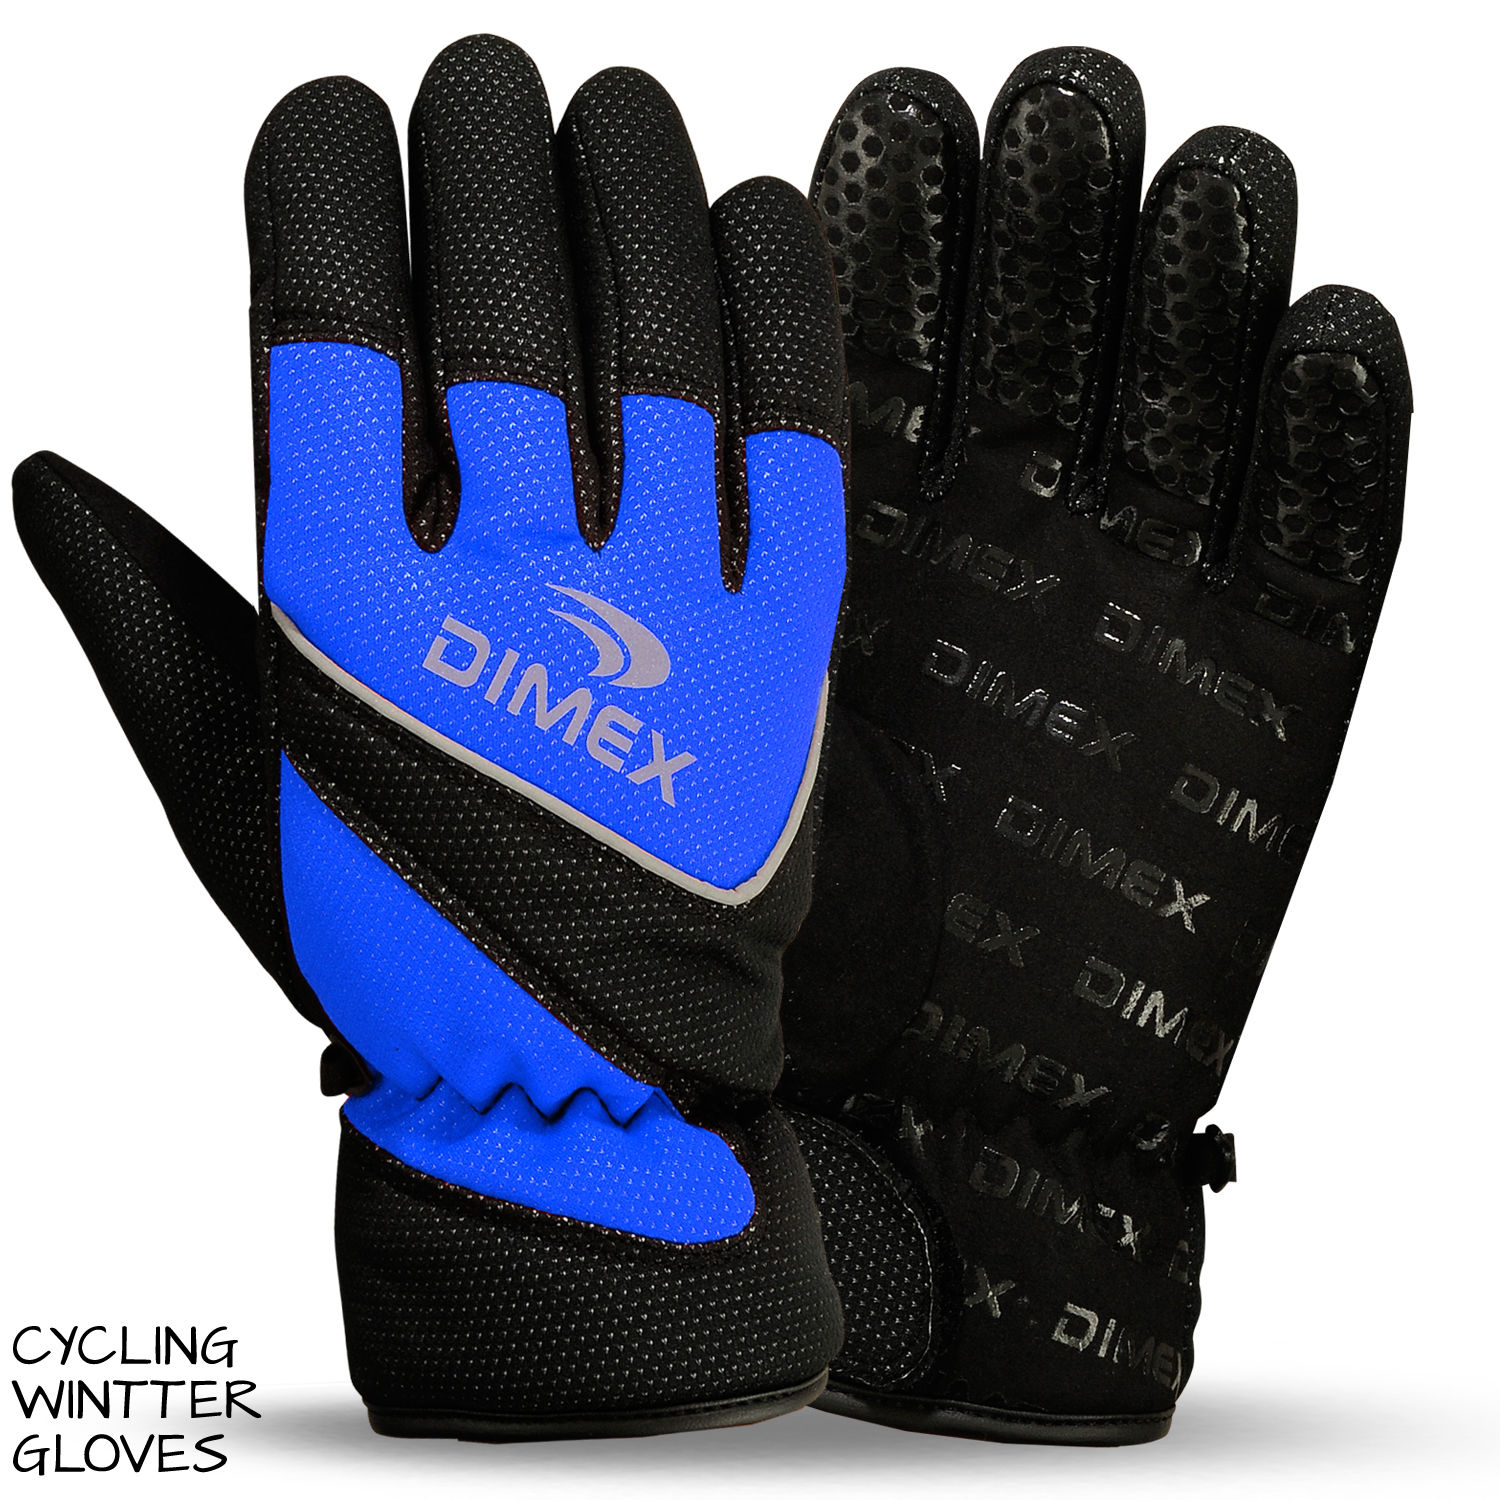 Download Cycling Gloves Bike Full Fingers Autumn/Winter Windproof ...